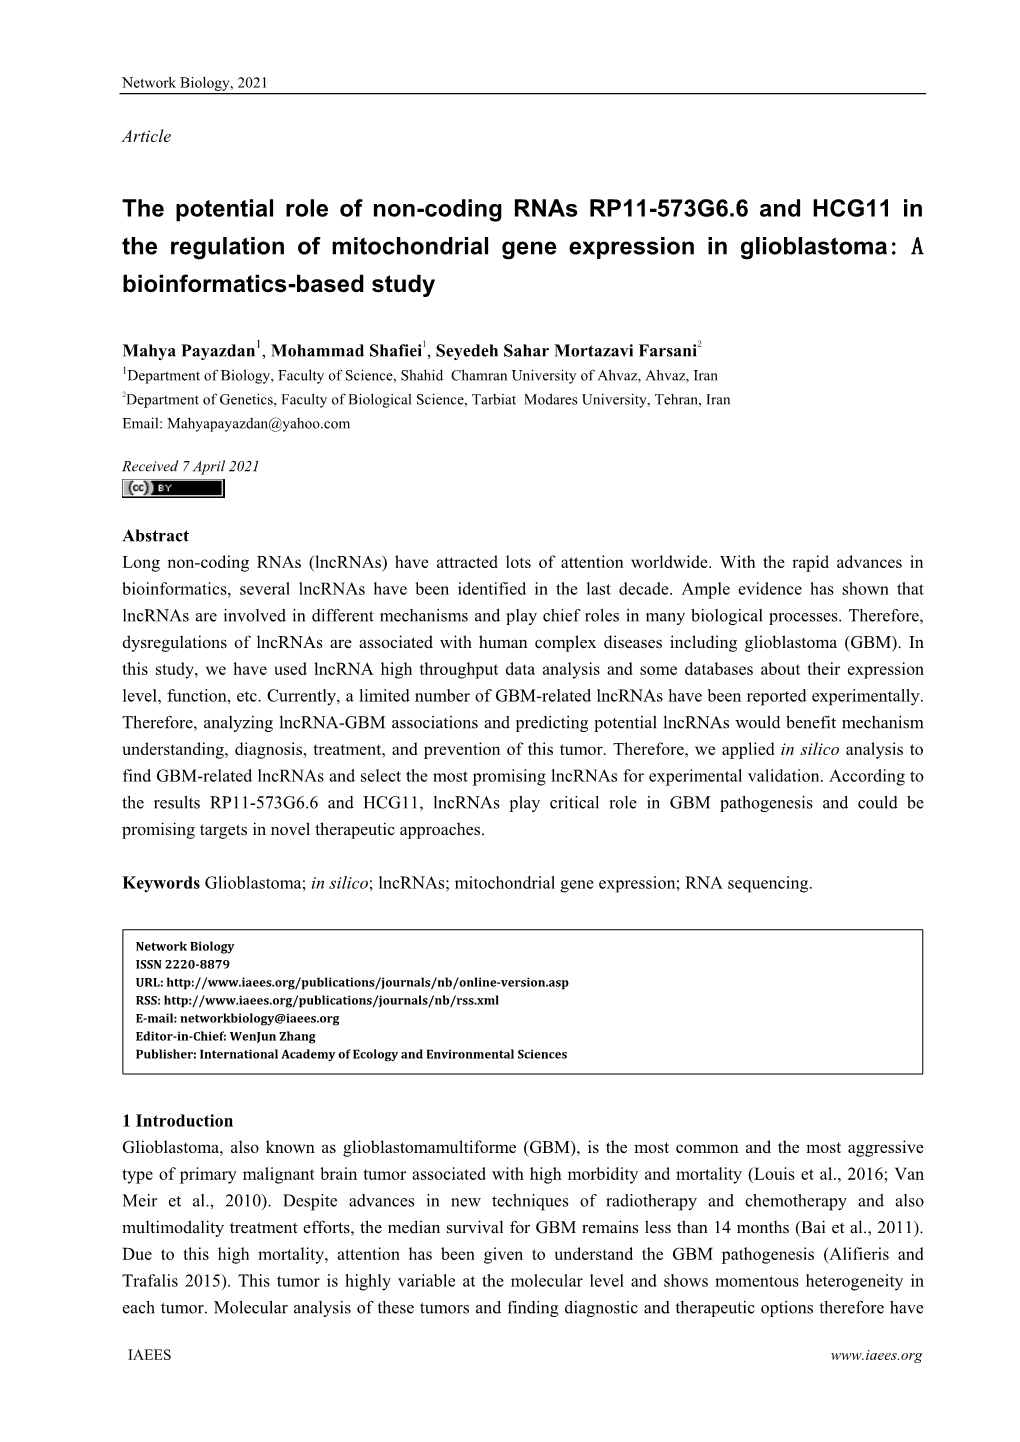 The Potential Role of Non-Coding Rnas RP11-573G6.6 and HCG11 in the Regulation of Mitochondrial Gene Expression in Glioblastoma: a Bioinformatics-Based Study